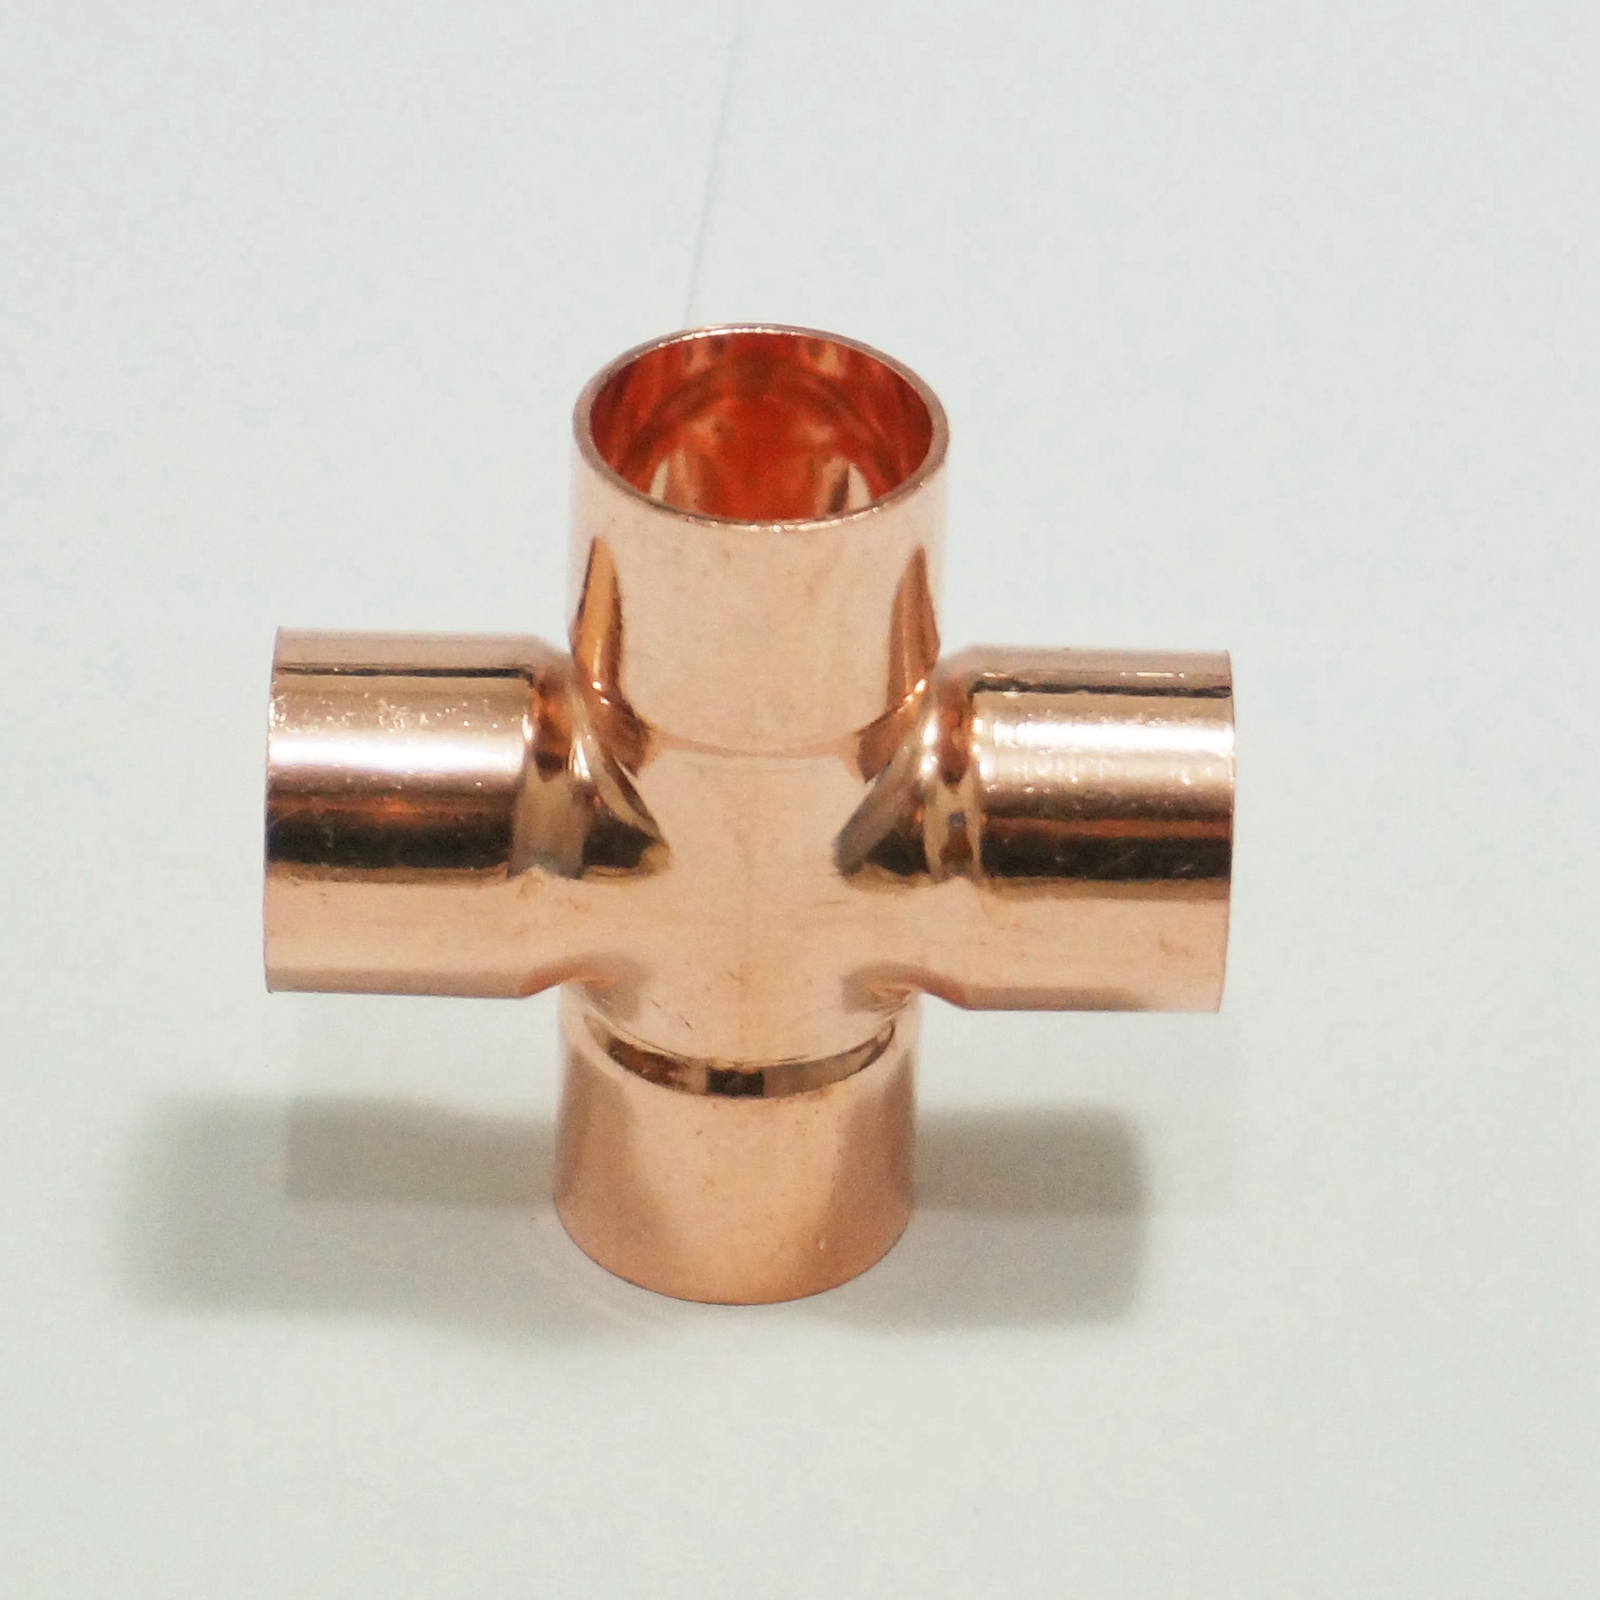 22x1mm Copper End Feed Equal Cross 4 Way Plumbing Pipe Fitting for ...